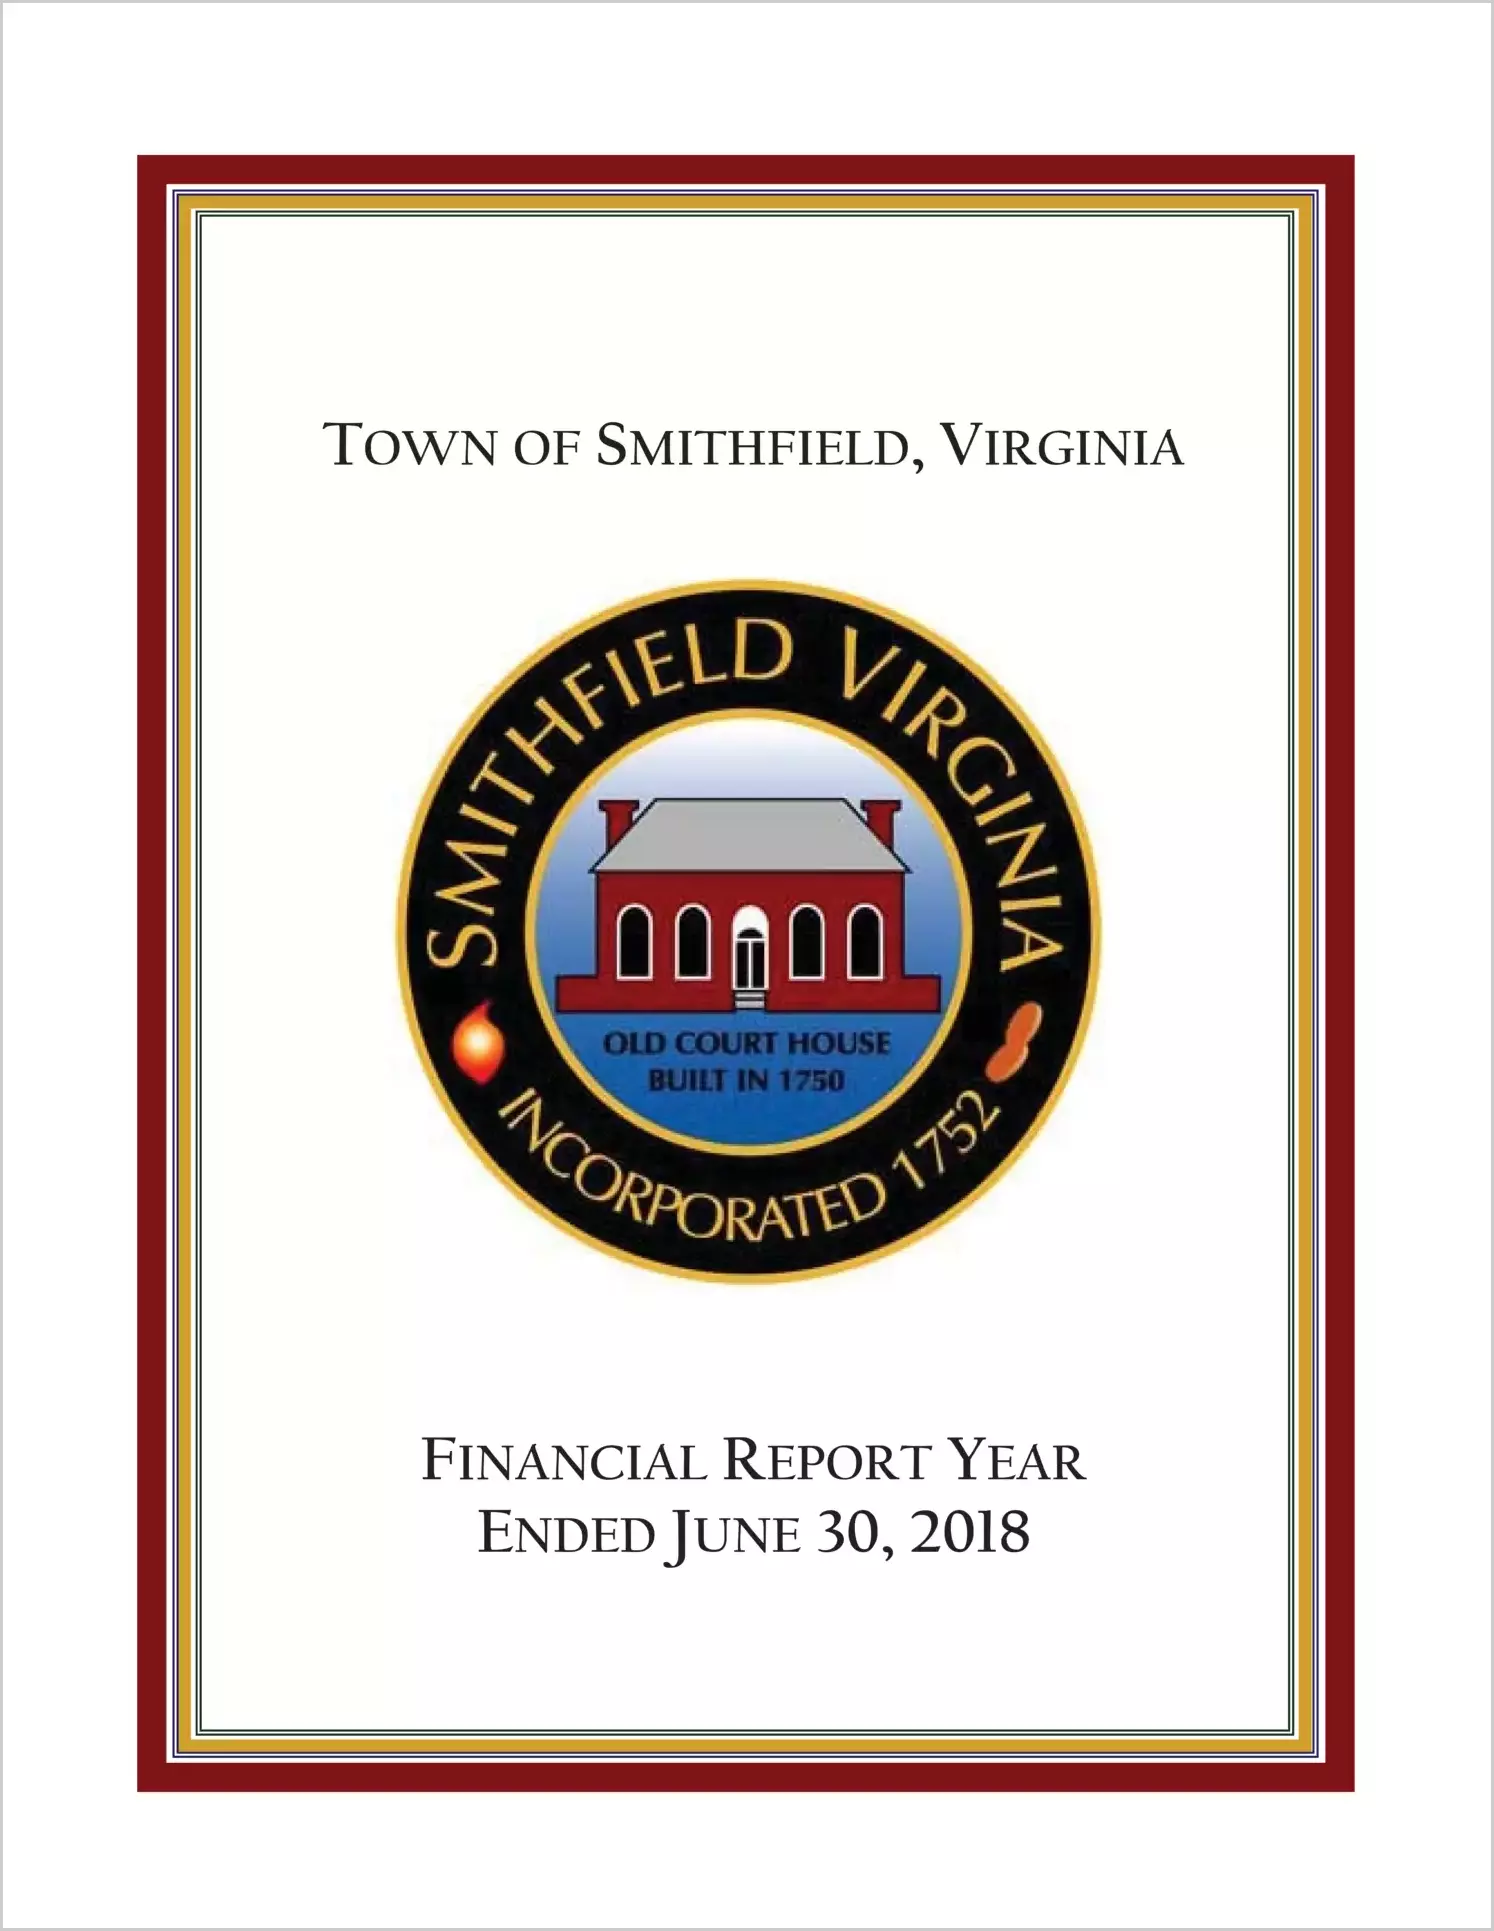 2018 Annual Financial Report for Town of Smithfield